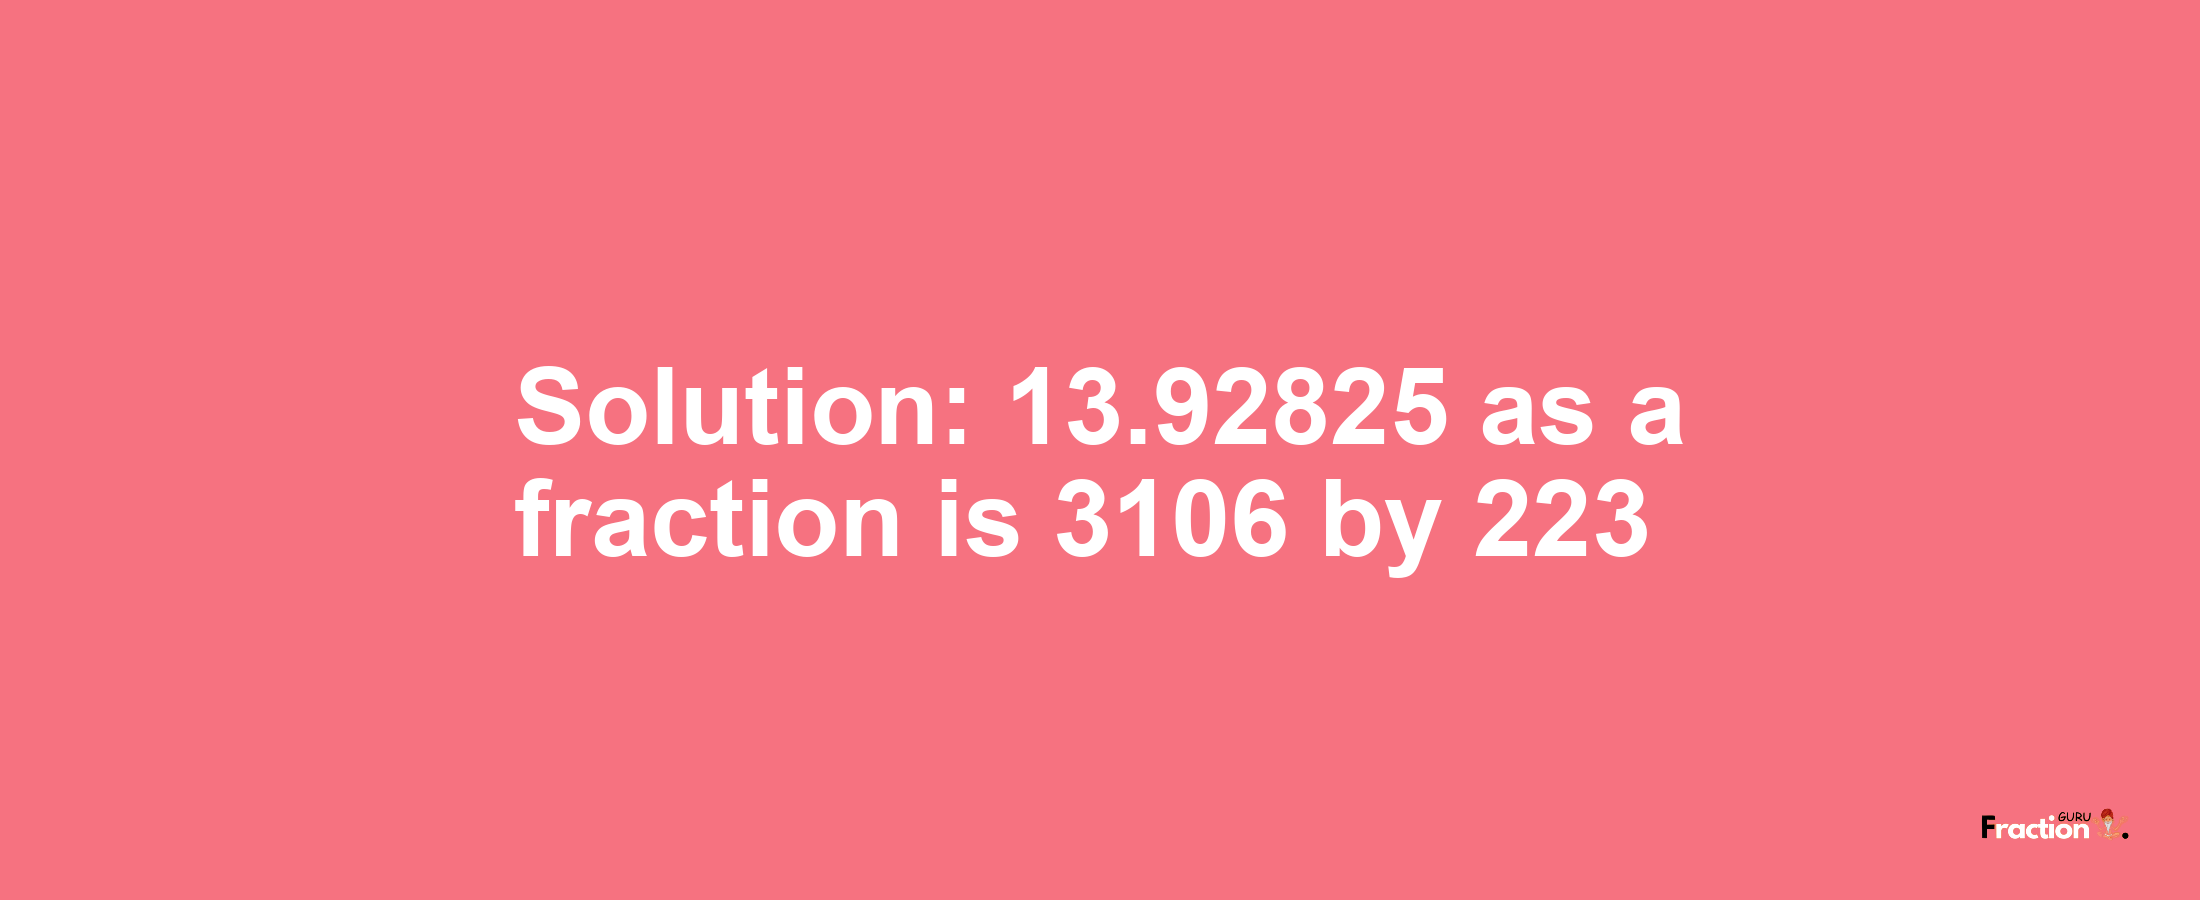 Solution:13.92825 as a fraction is 3106/223